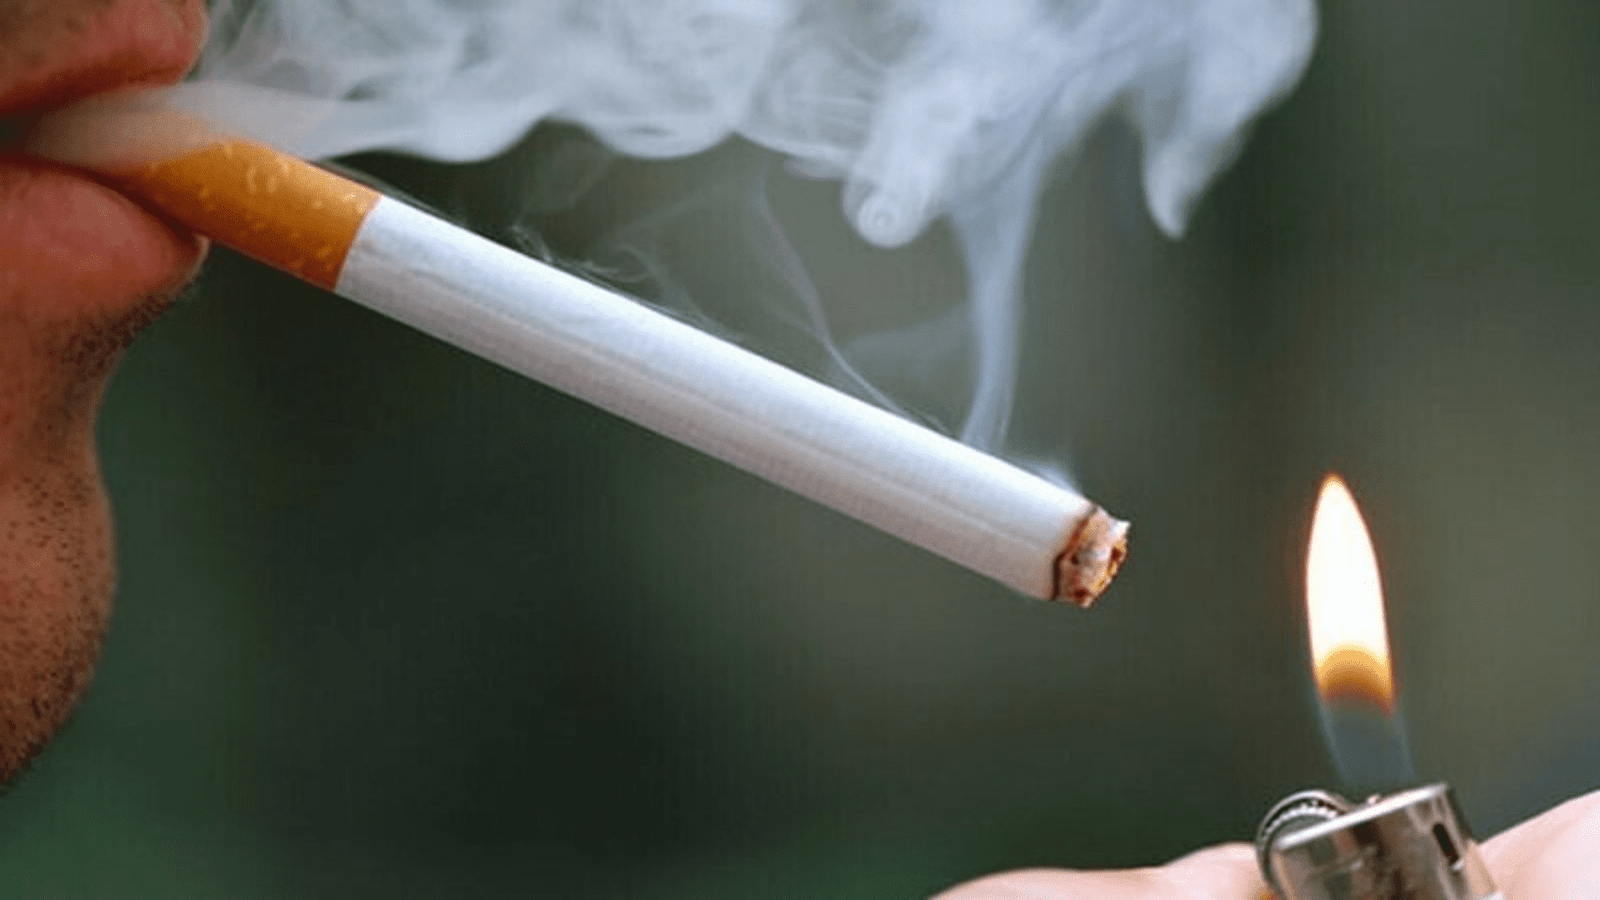 WHO report reveals 23.1 pc of cigarettes in Pakistan sold illegally